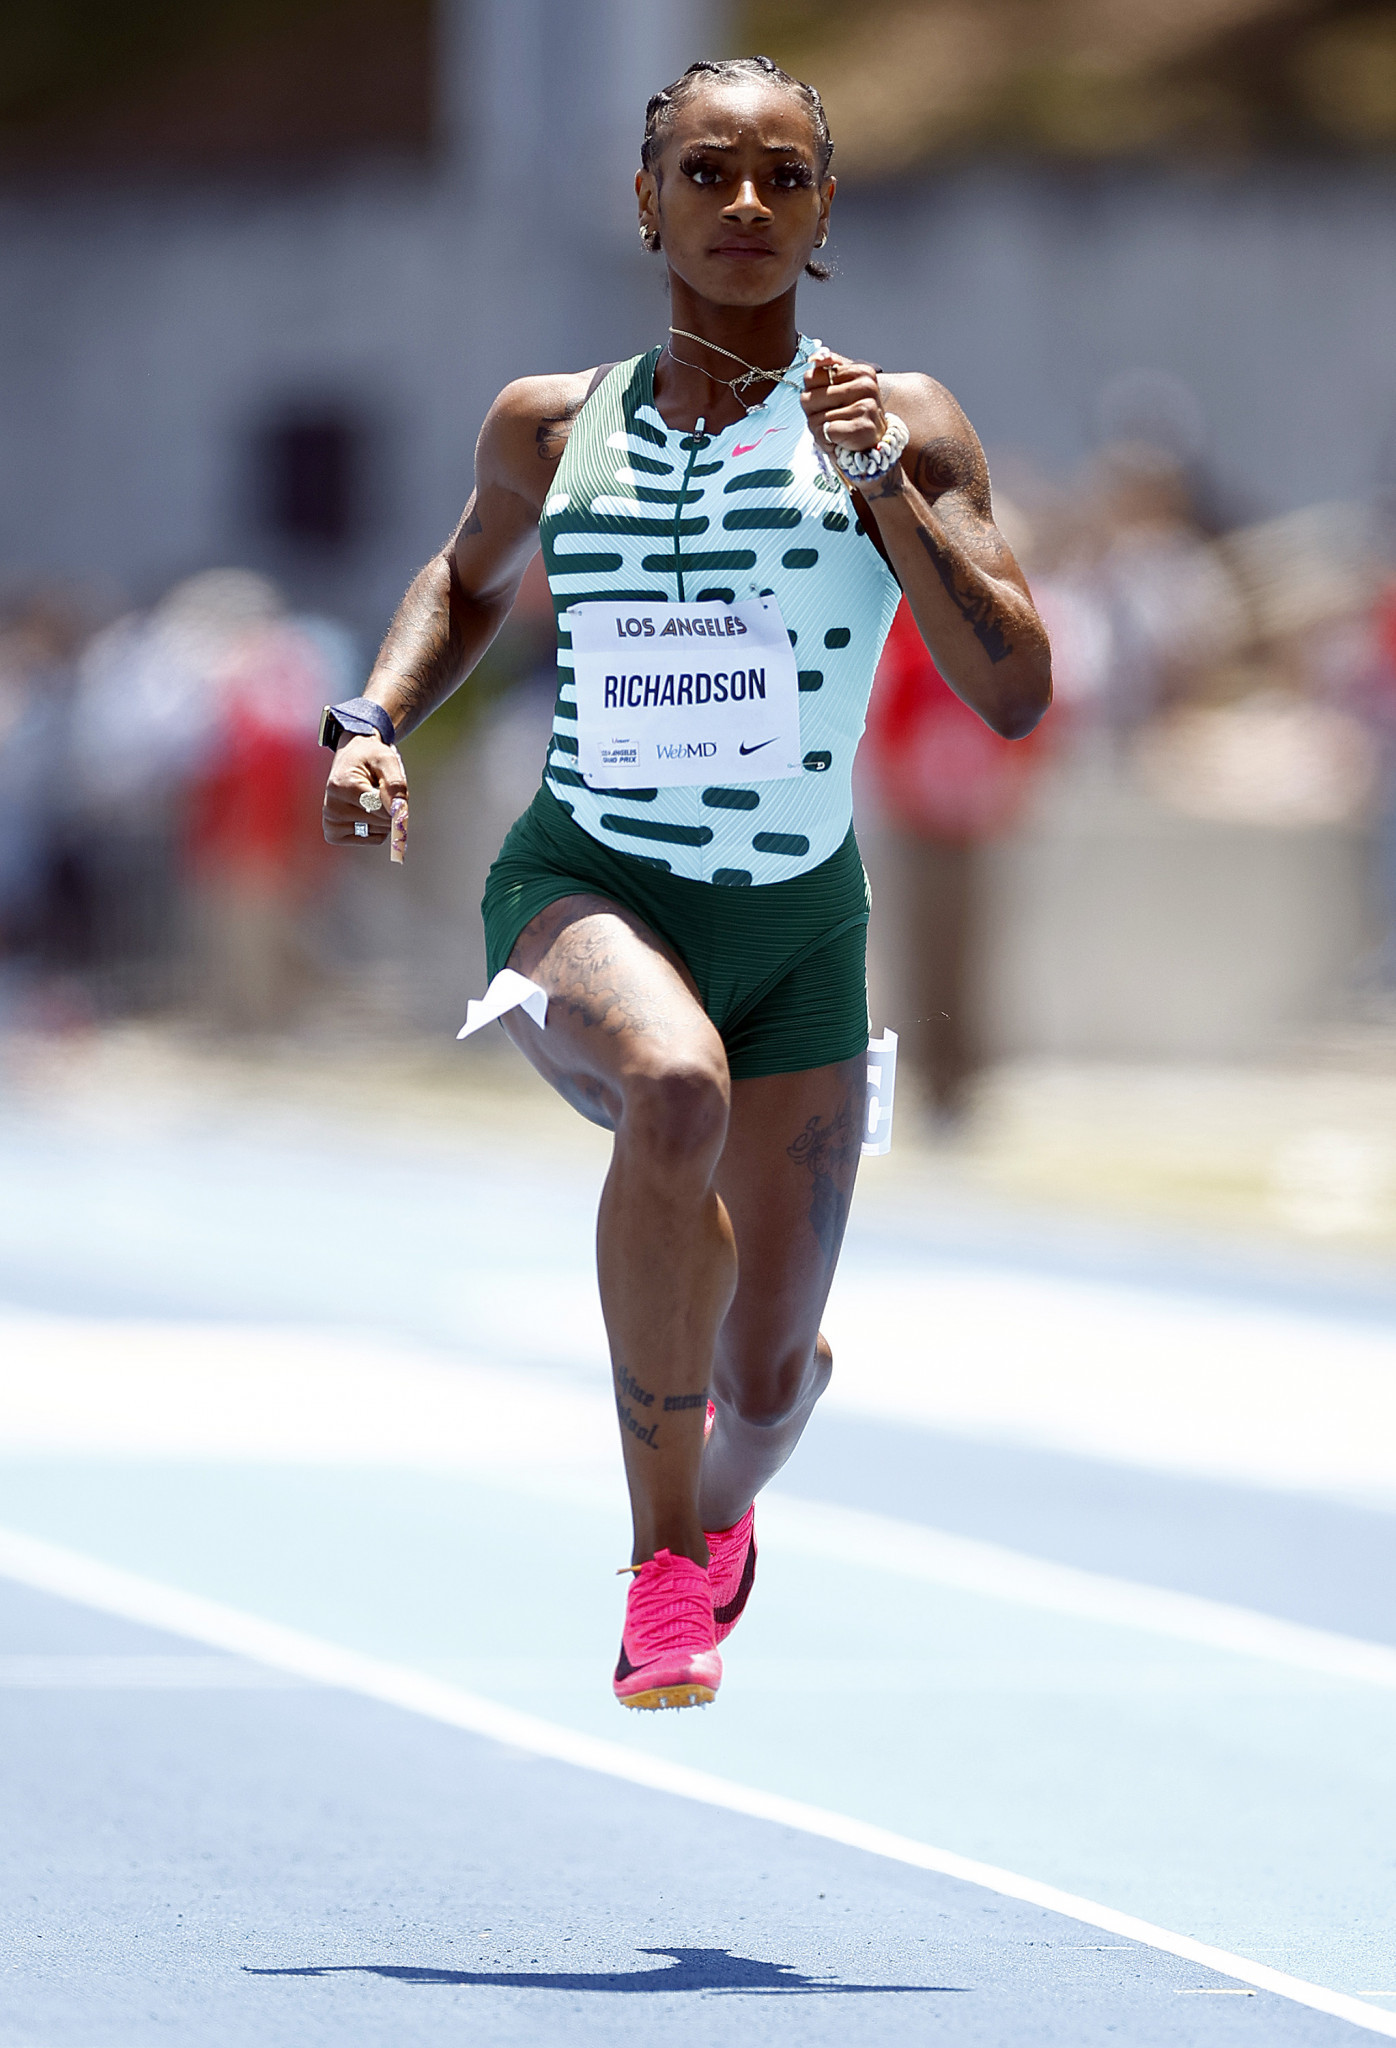 Sha’Carri Richardson clocked a fast time in qualifying for the 100 metres at the Los Angeles Grand Prix, but then failed to appear in the final, disappointing many of the crowd ©Getty Images